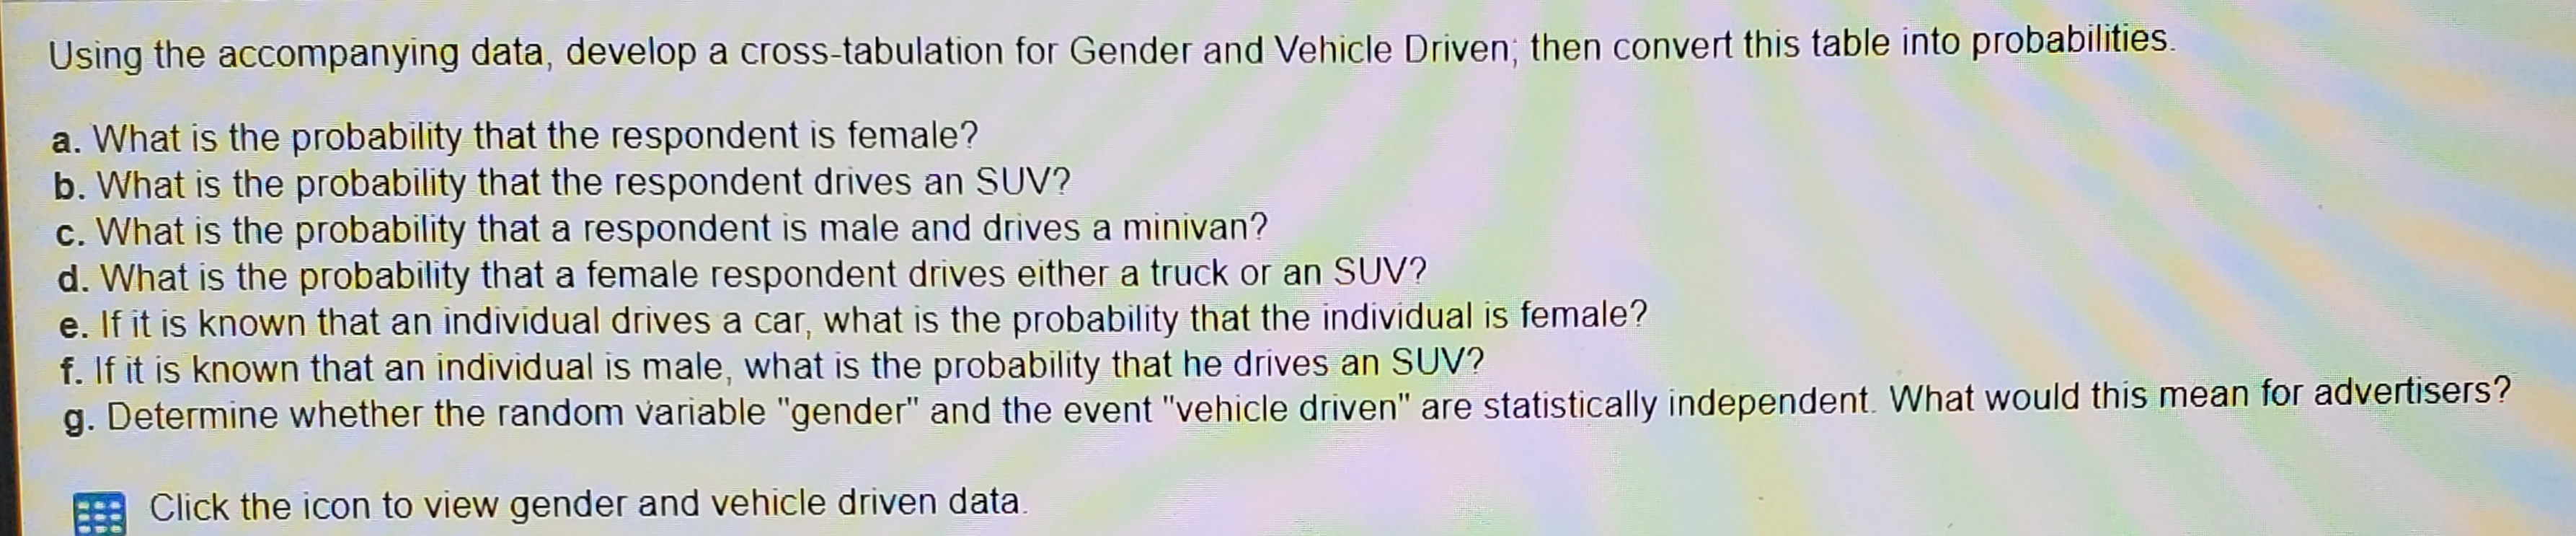 d. What is the probability that a female respondent drives either a truck or an SUV?
e. If it is known that an individual drives a car, what is the probability that the individual is female?
f. If it is known that an individual is male, what is the probability that he drives an SUV?
